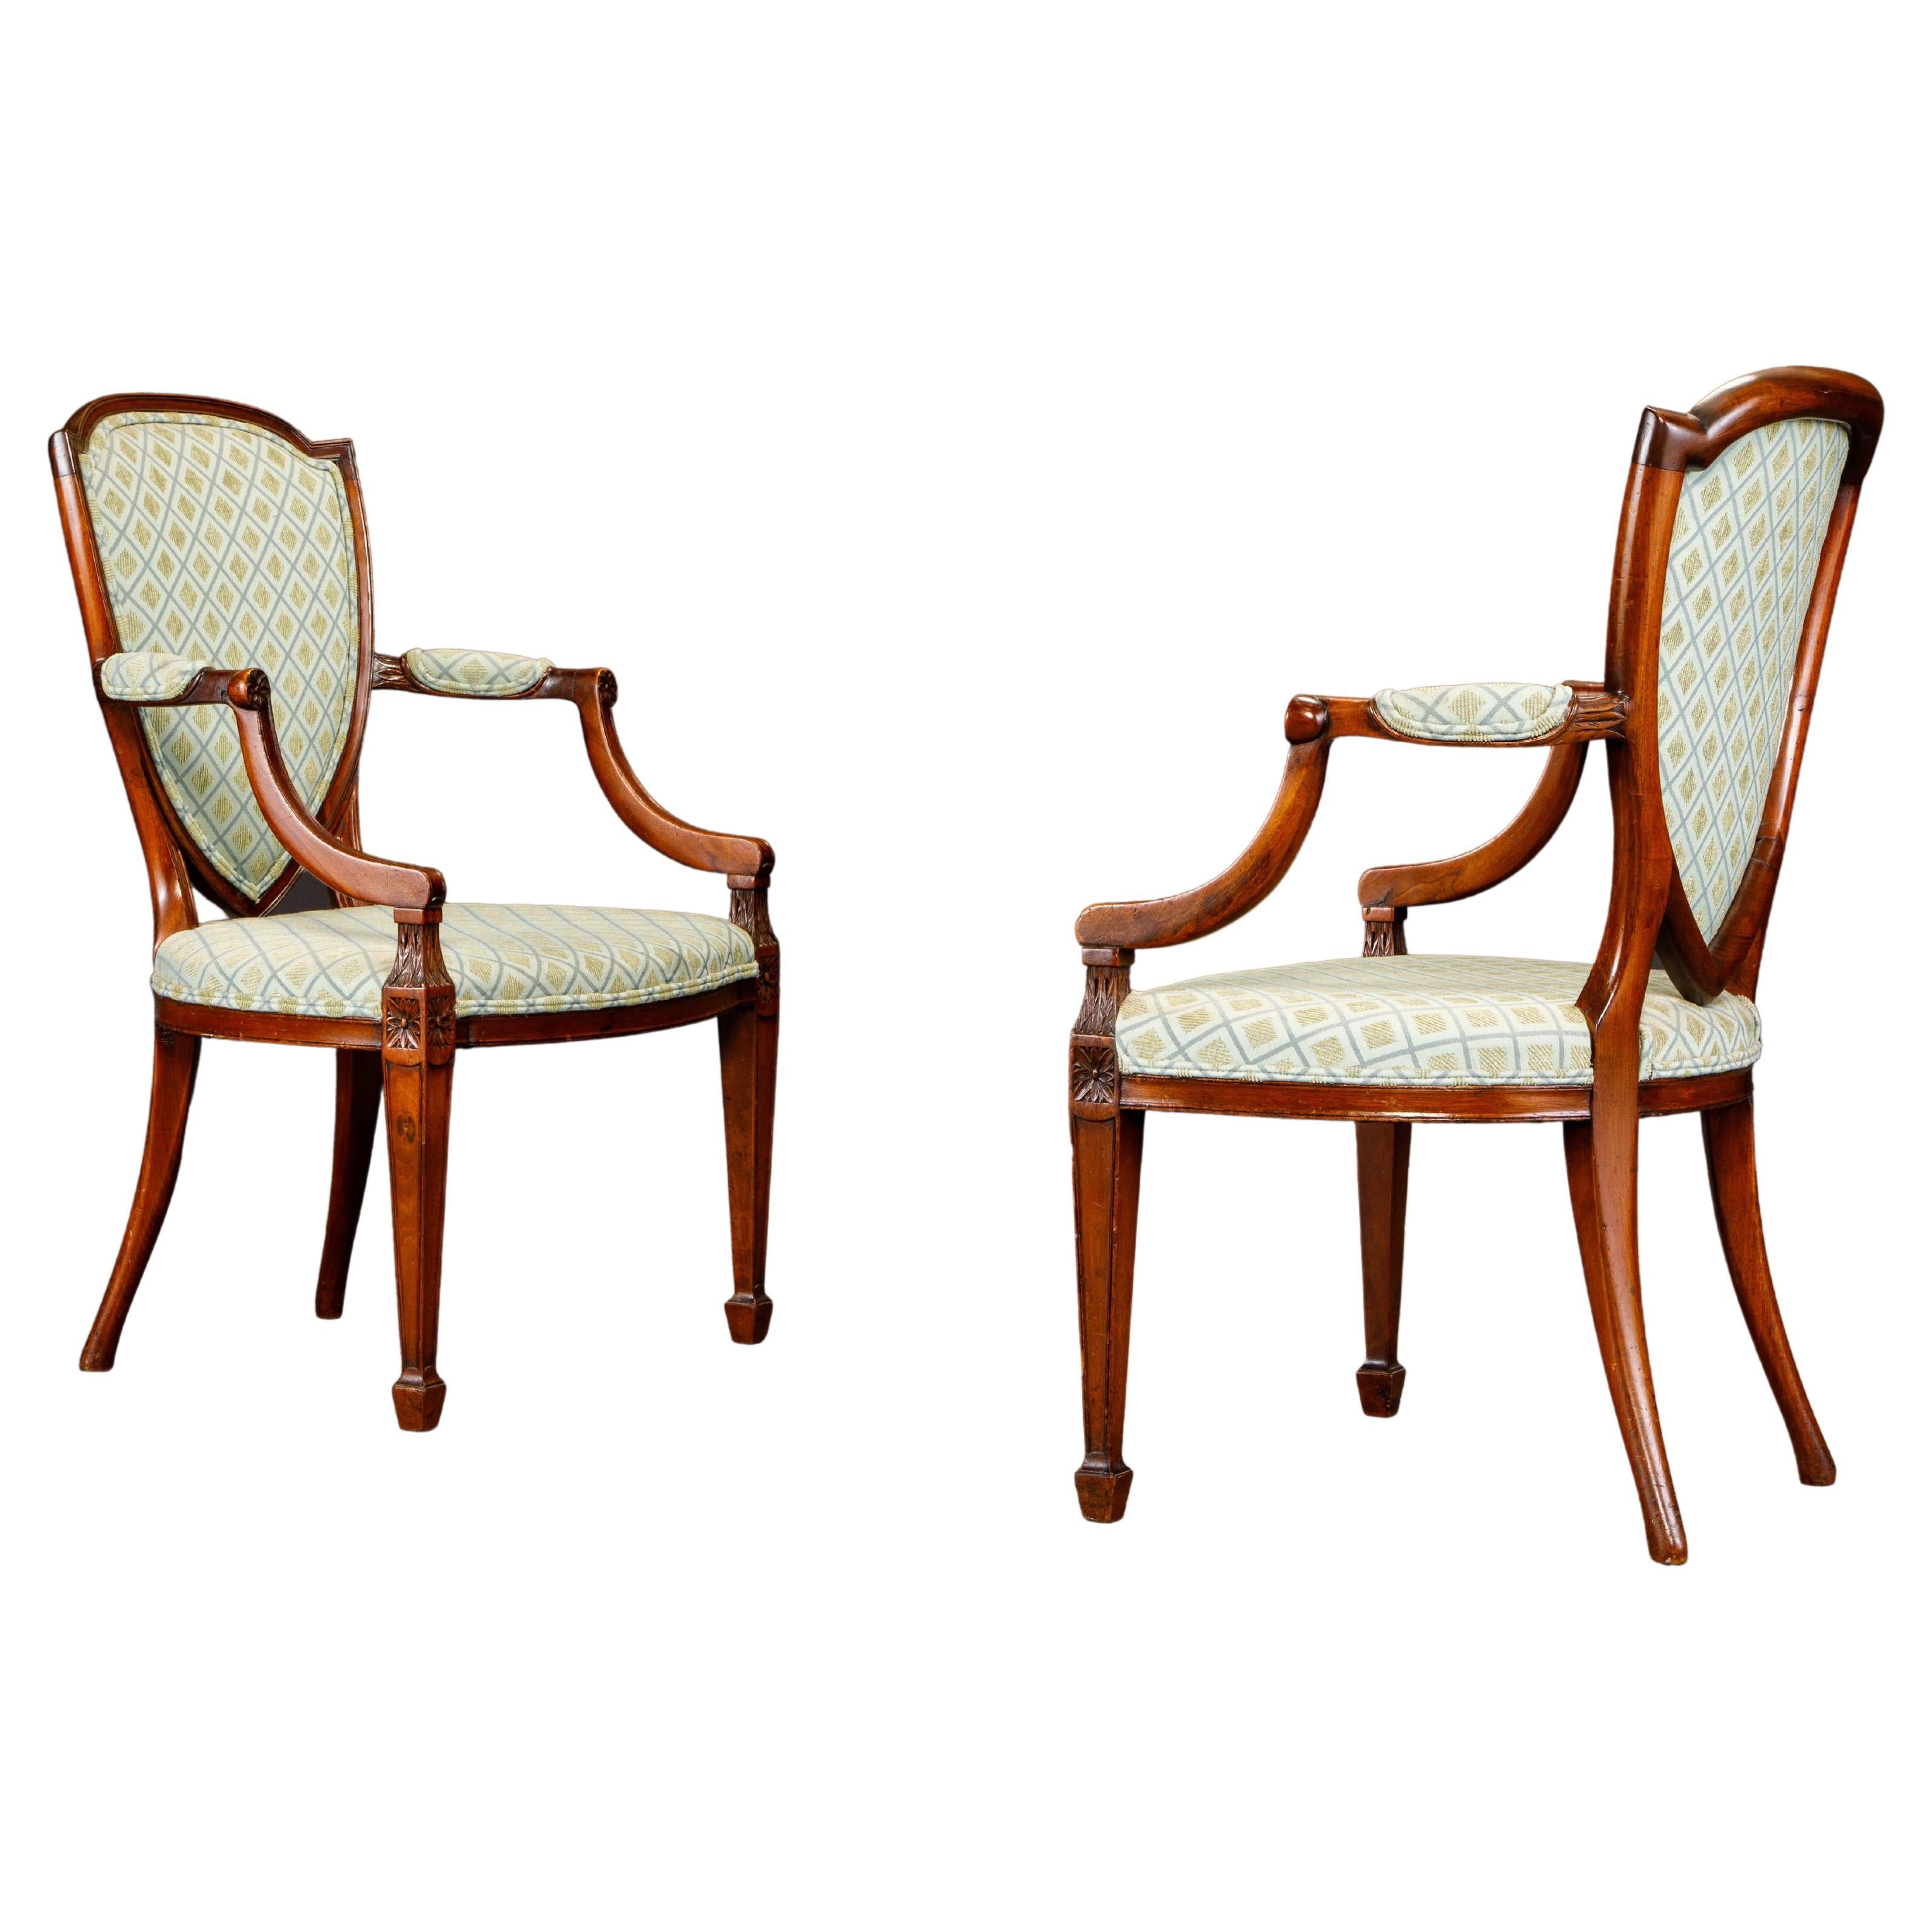 Pair of Upholstered Hepplewhite Shield-Back Armchairs w Provenance, circa 1870s